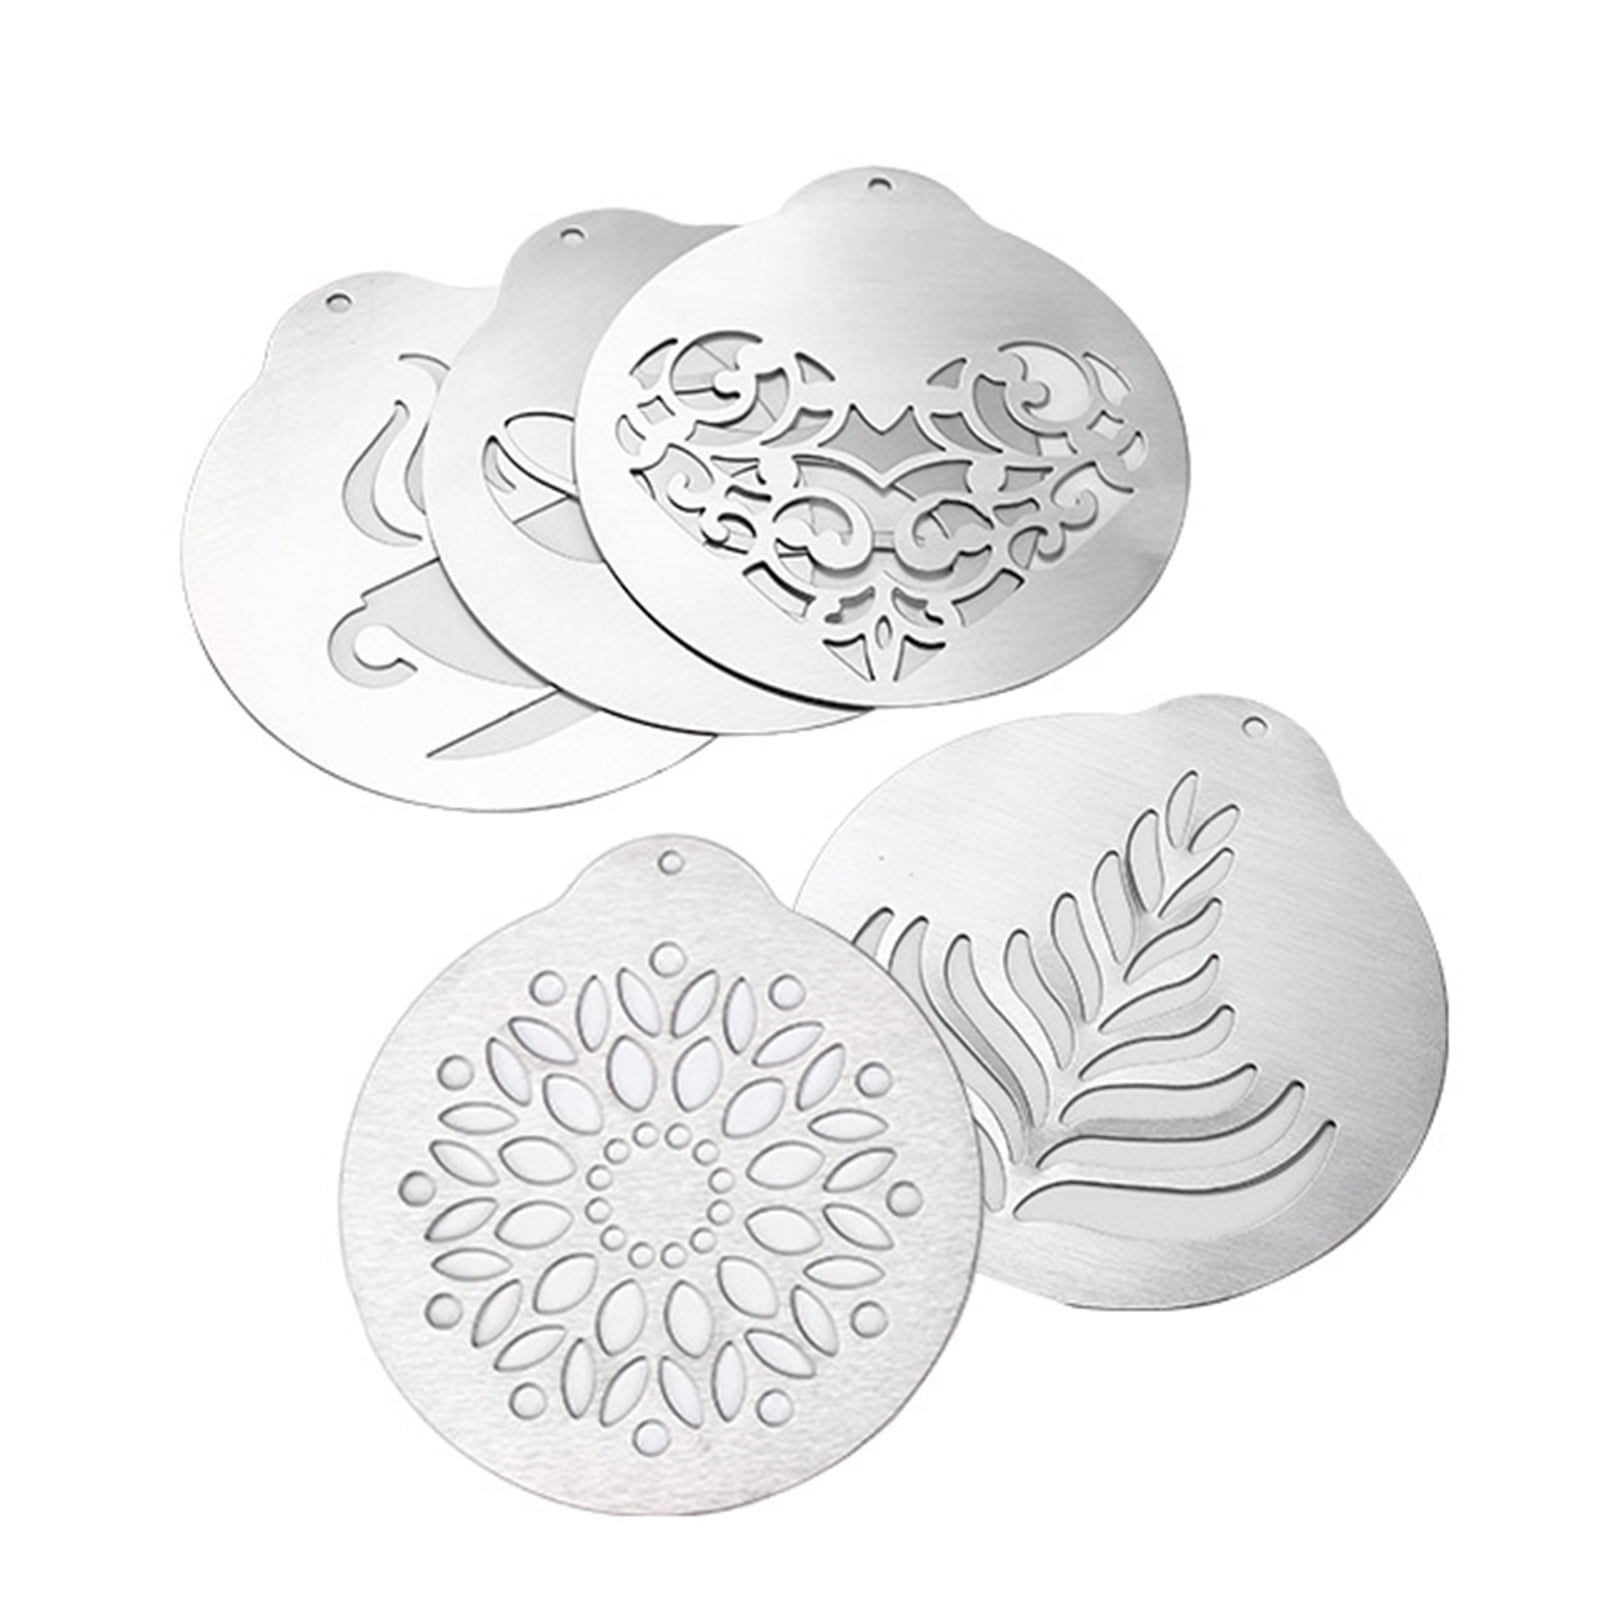 WOIWO 16 Pcs Coffee Decorating Stencils, Create Professional Designs  Customized for Coffee, Cakes and Bakery - Barista Grade Accessories